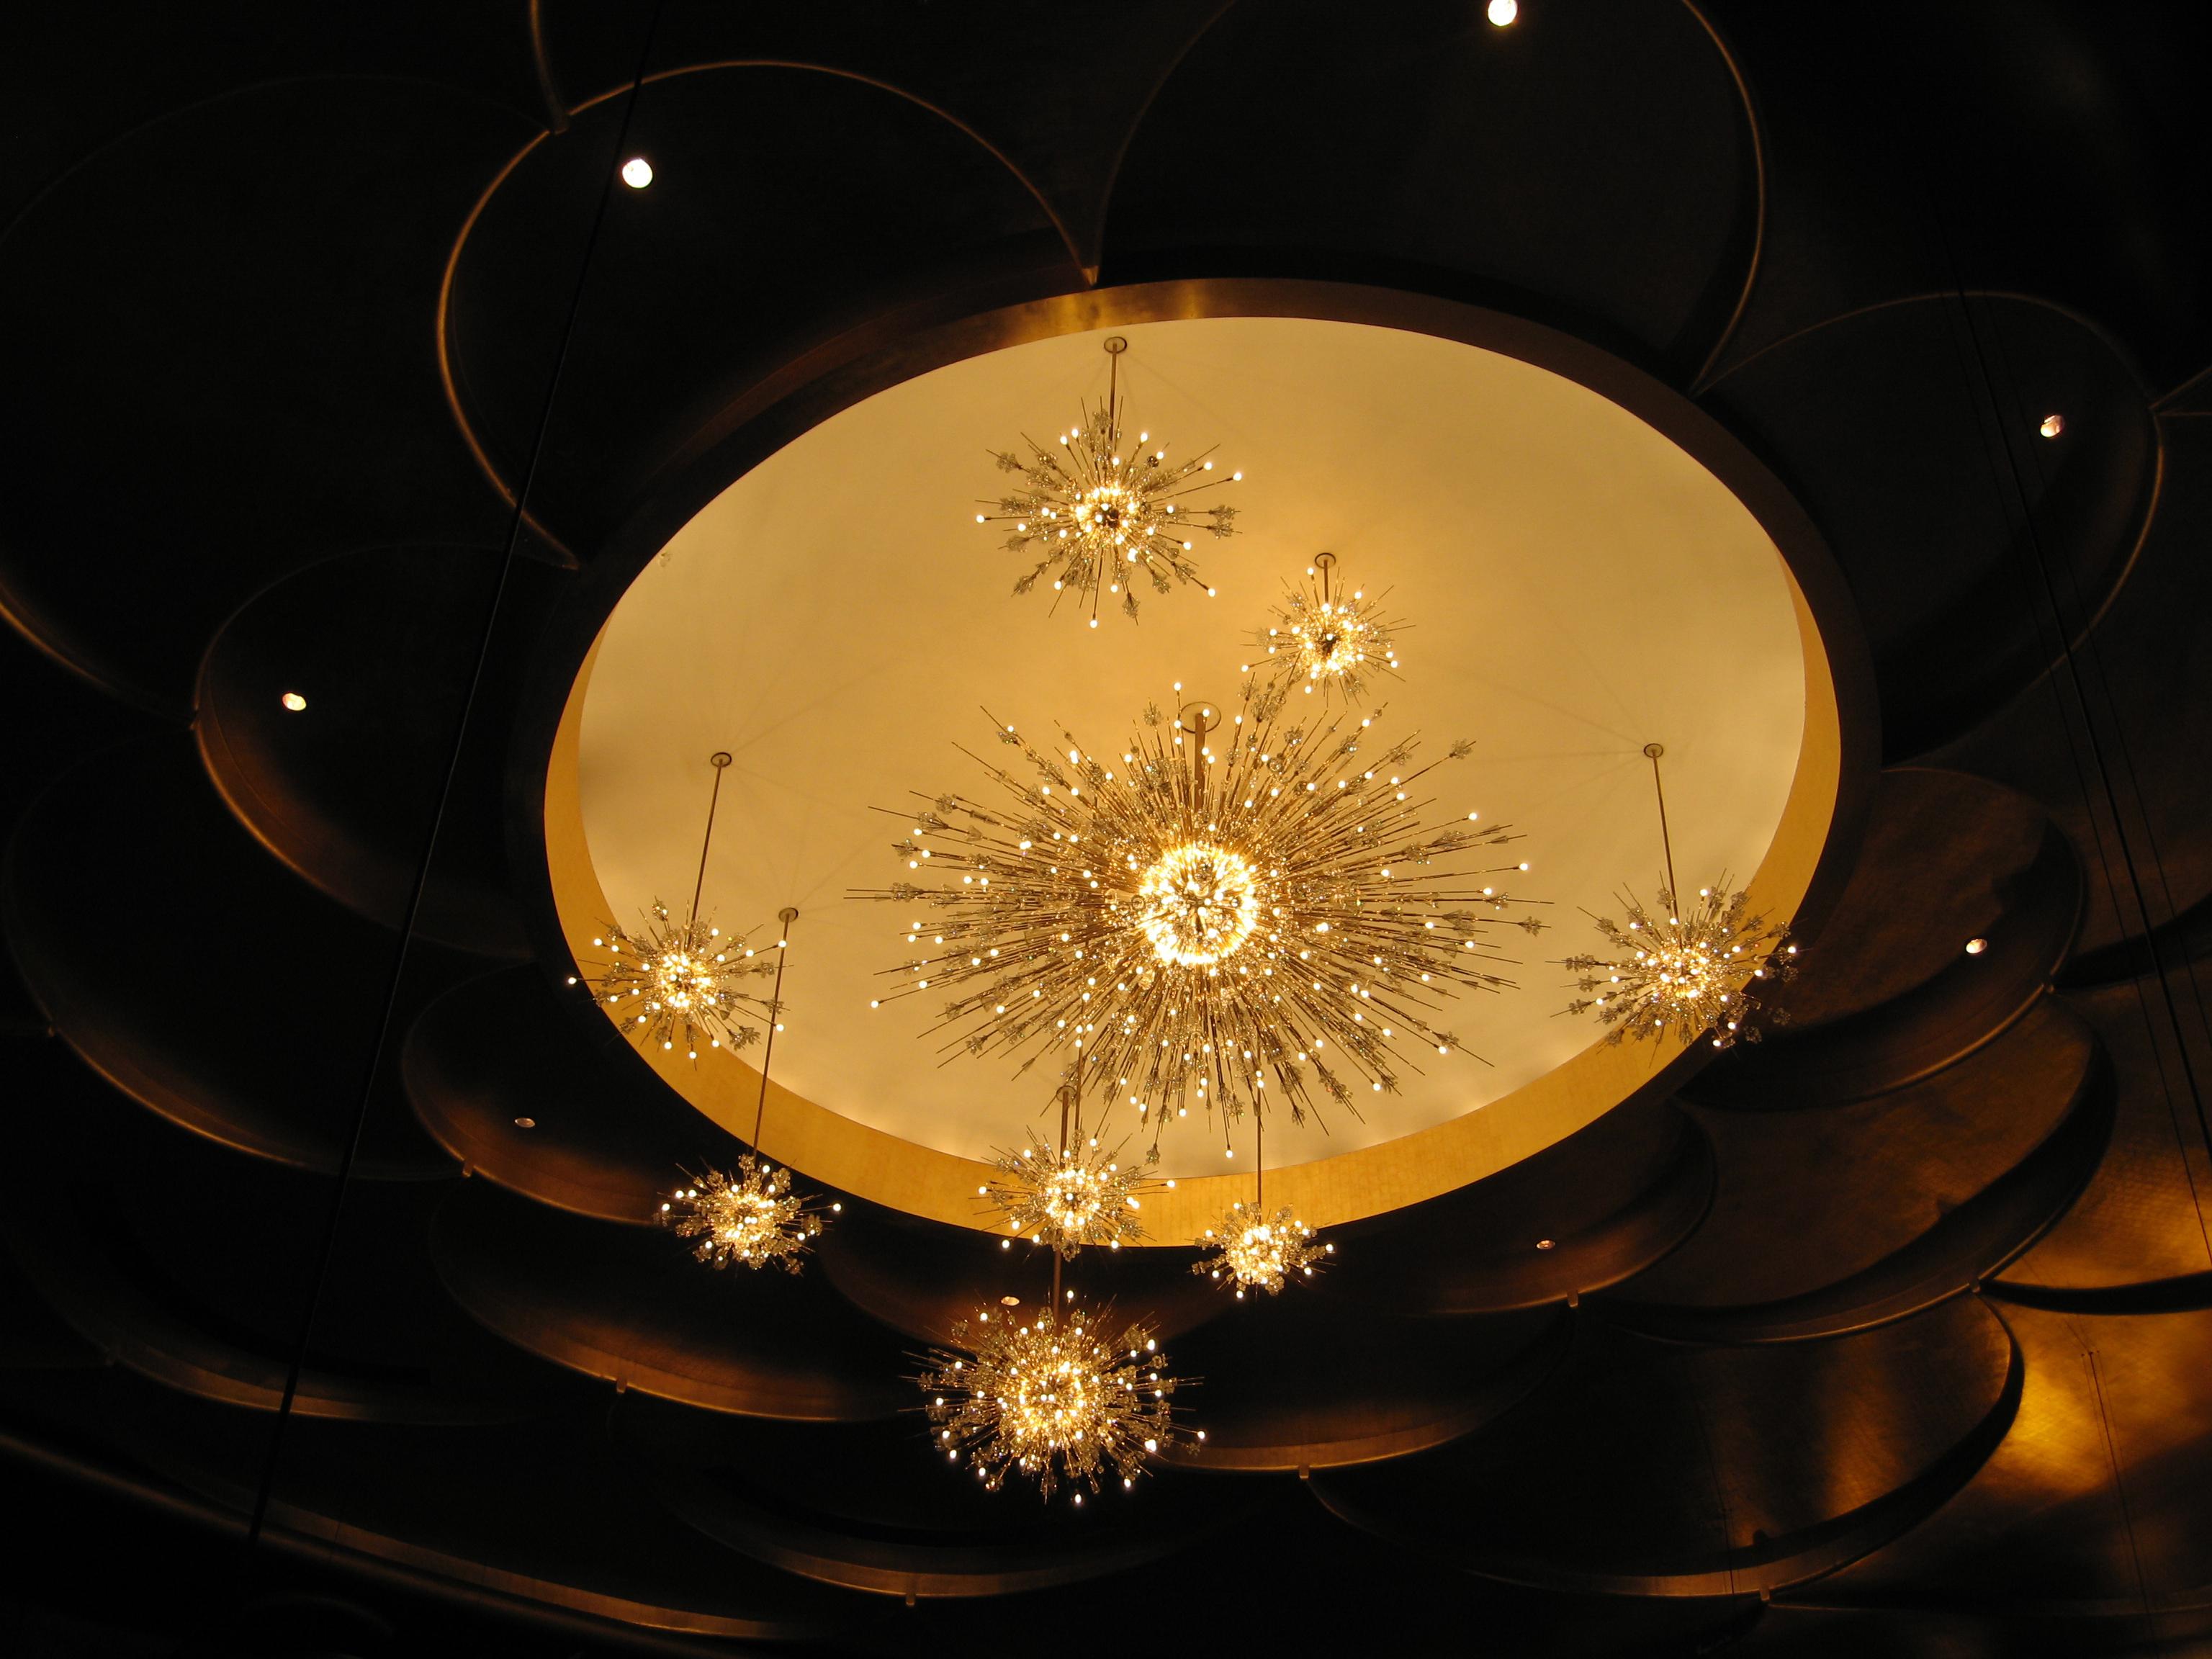 Designed in 1963, by Hans Harald Rather the Metropolitan Chandelier was created as a commission for the Metropolitan Opera in New York. The Lincoln Center commission was ordered to Lobmeyr by the Republic of Austria as a gift in gratitude for the